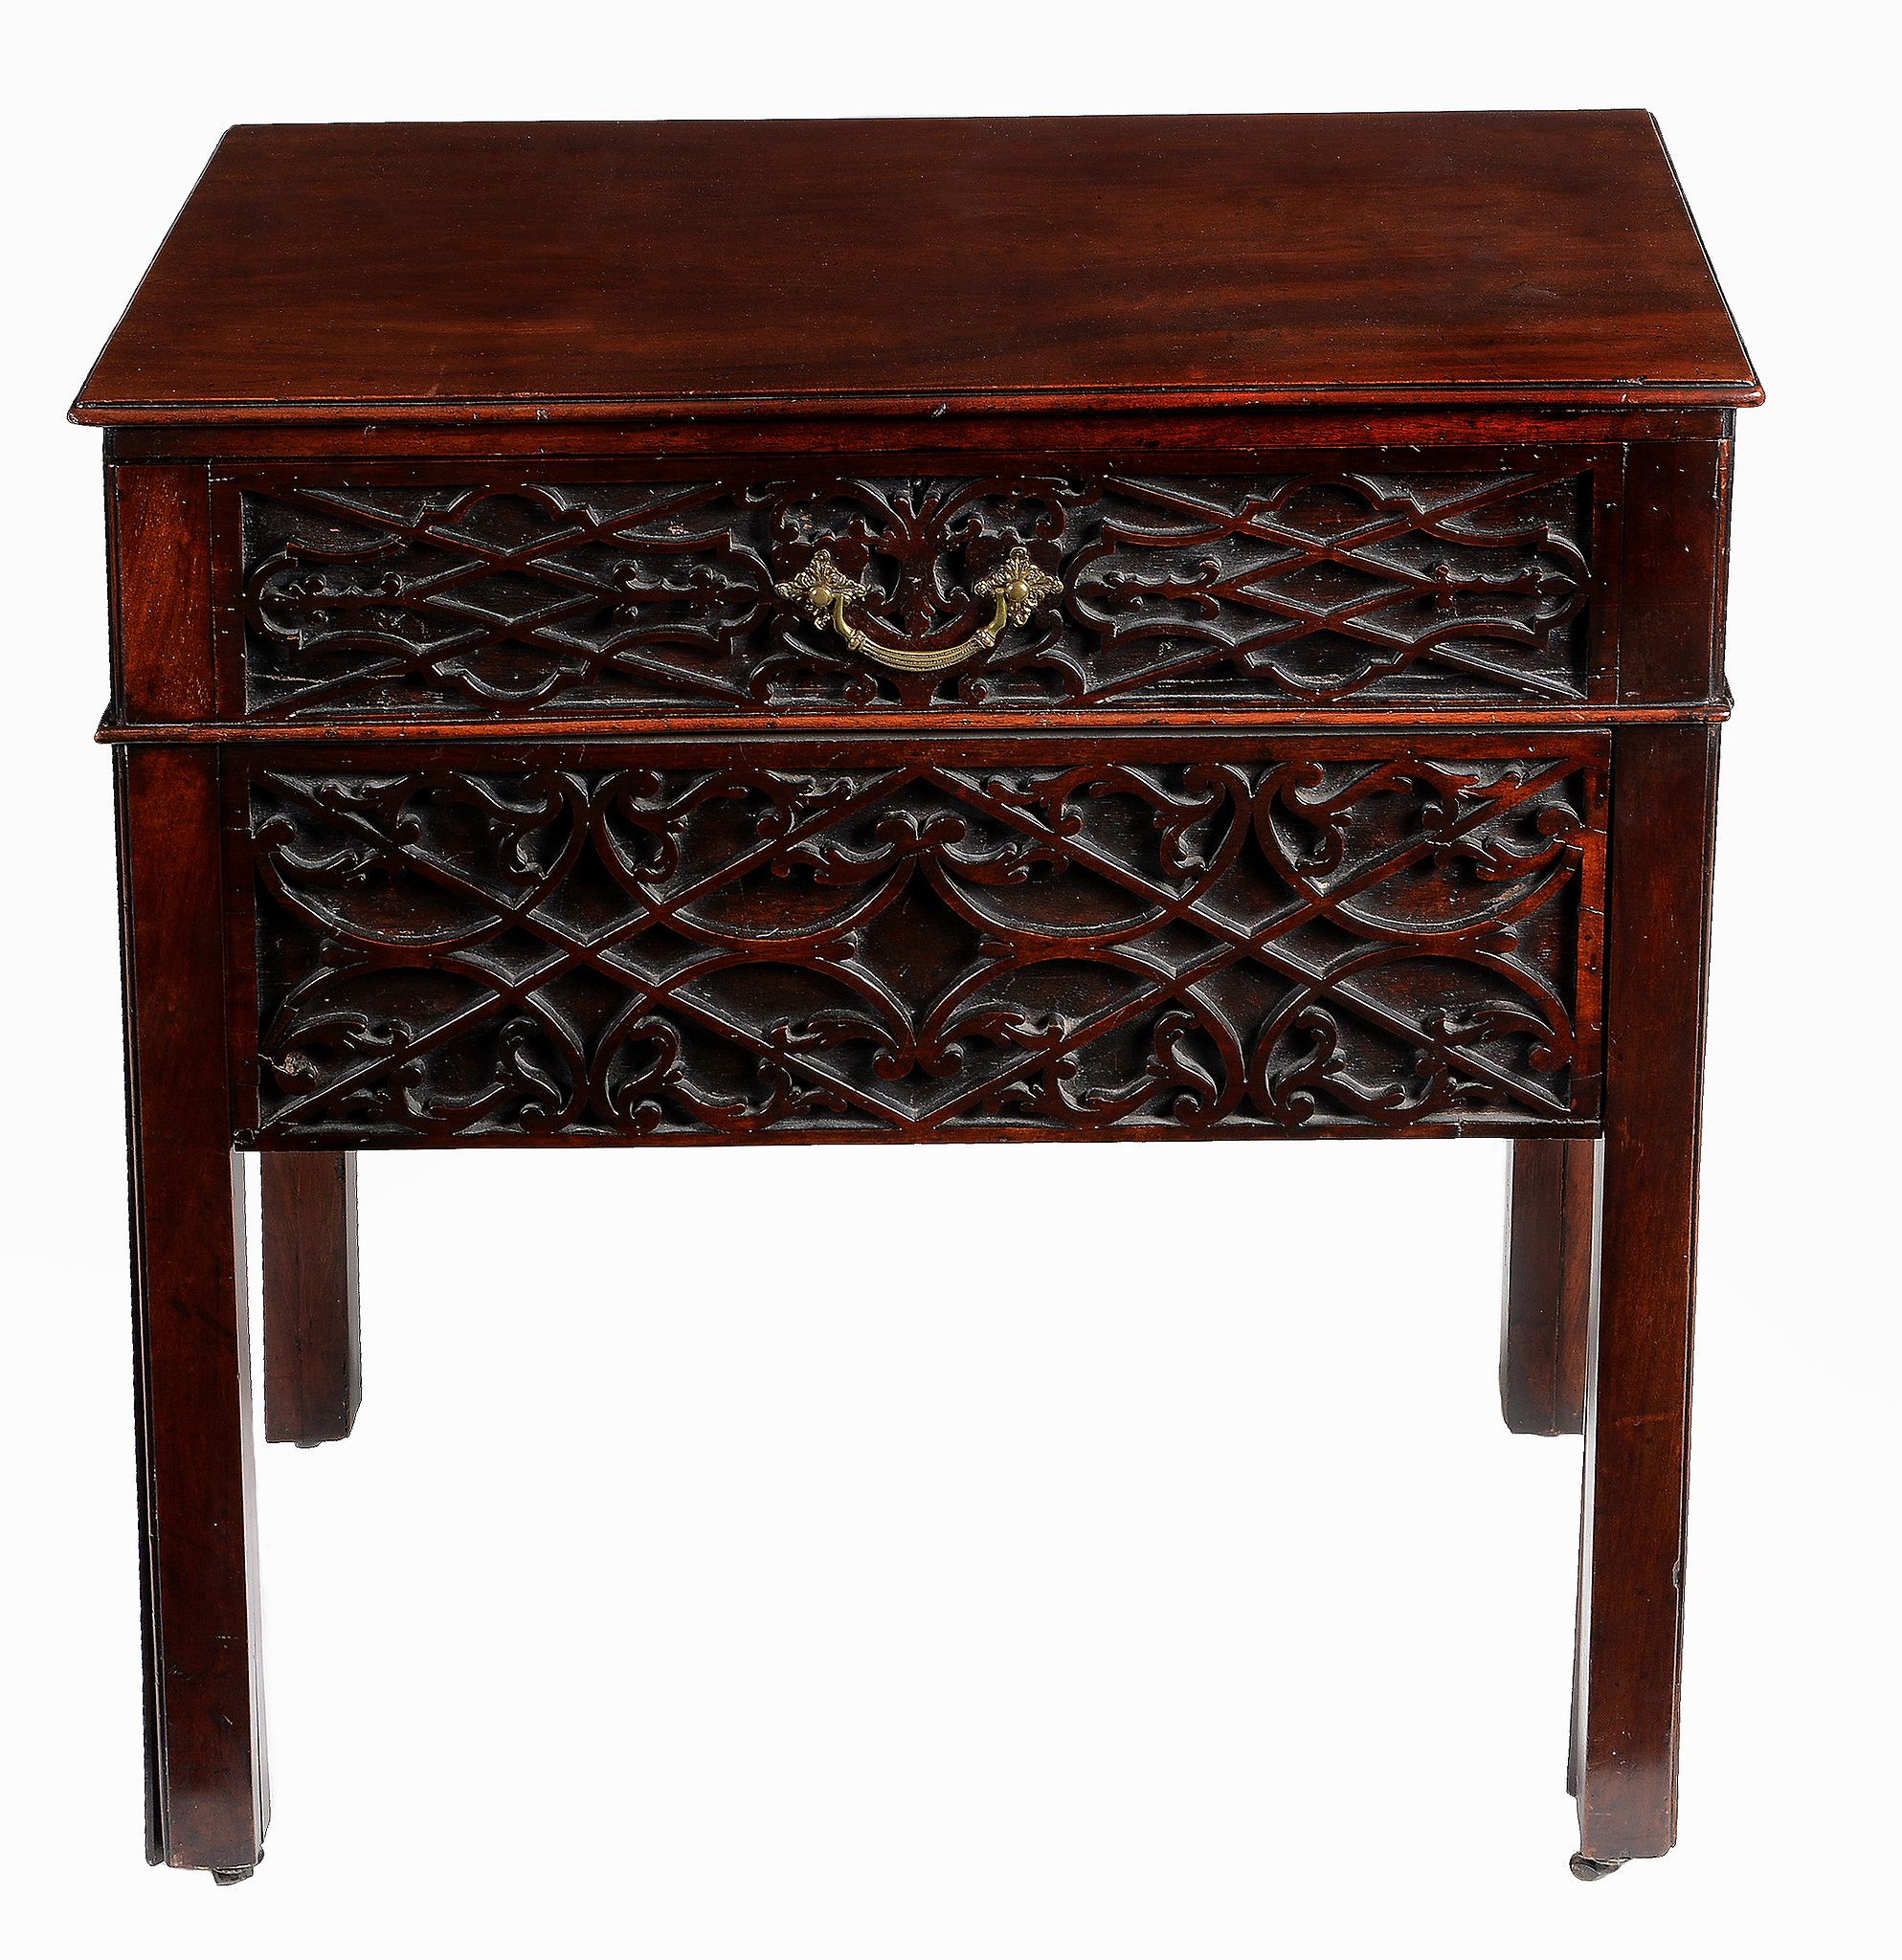 A George III mahogany writing table,   circa 1780, the rectangular moulded top with hinged rear